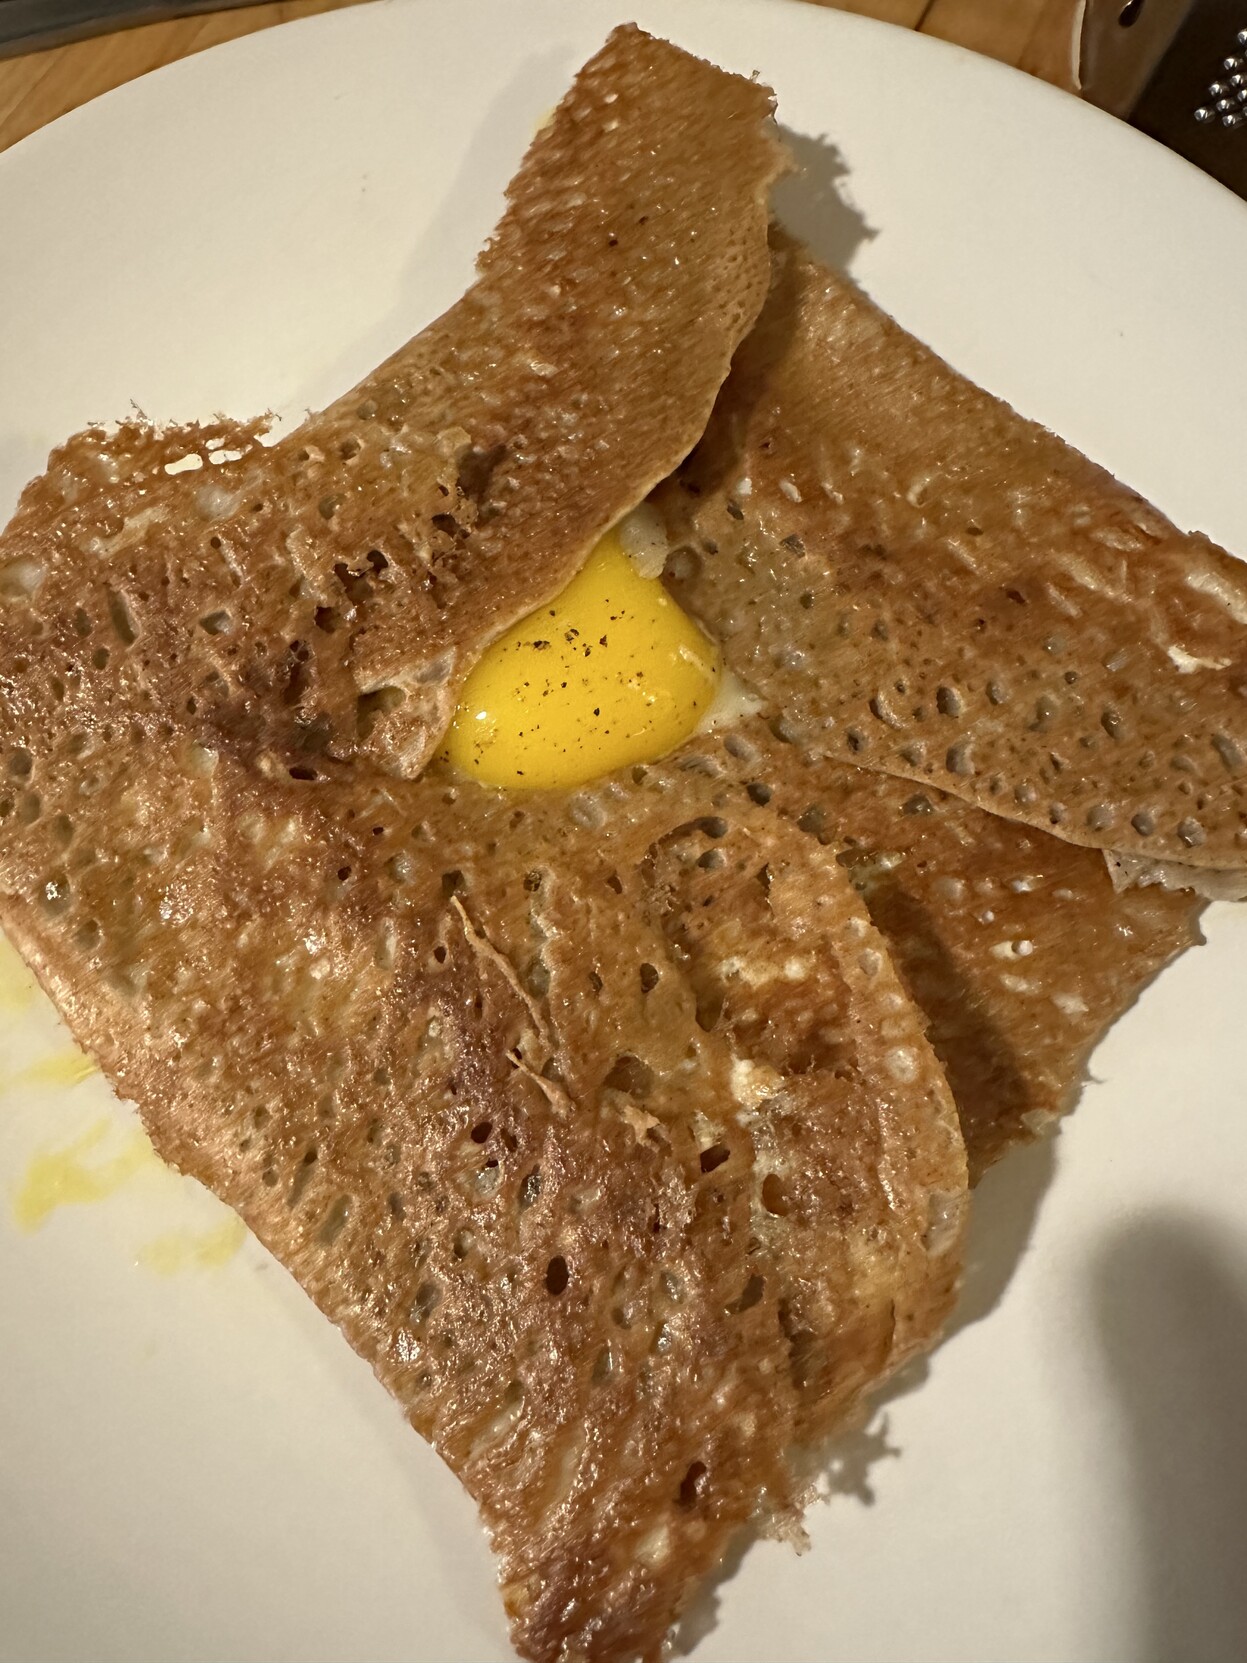 Picture of a Galette, it’s brown, thin and crispy with an egg yolk in its center.